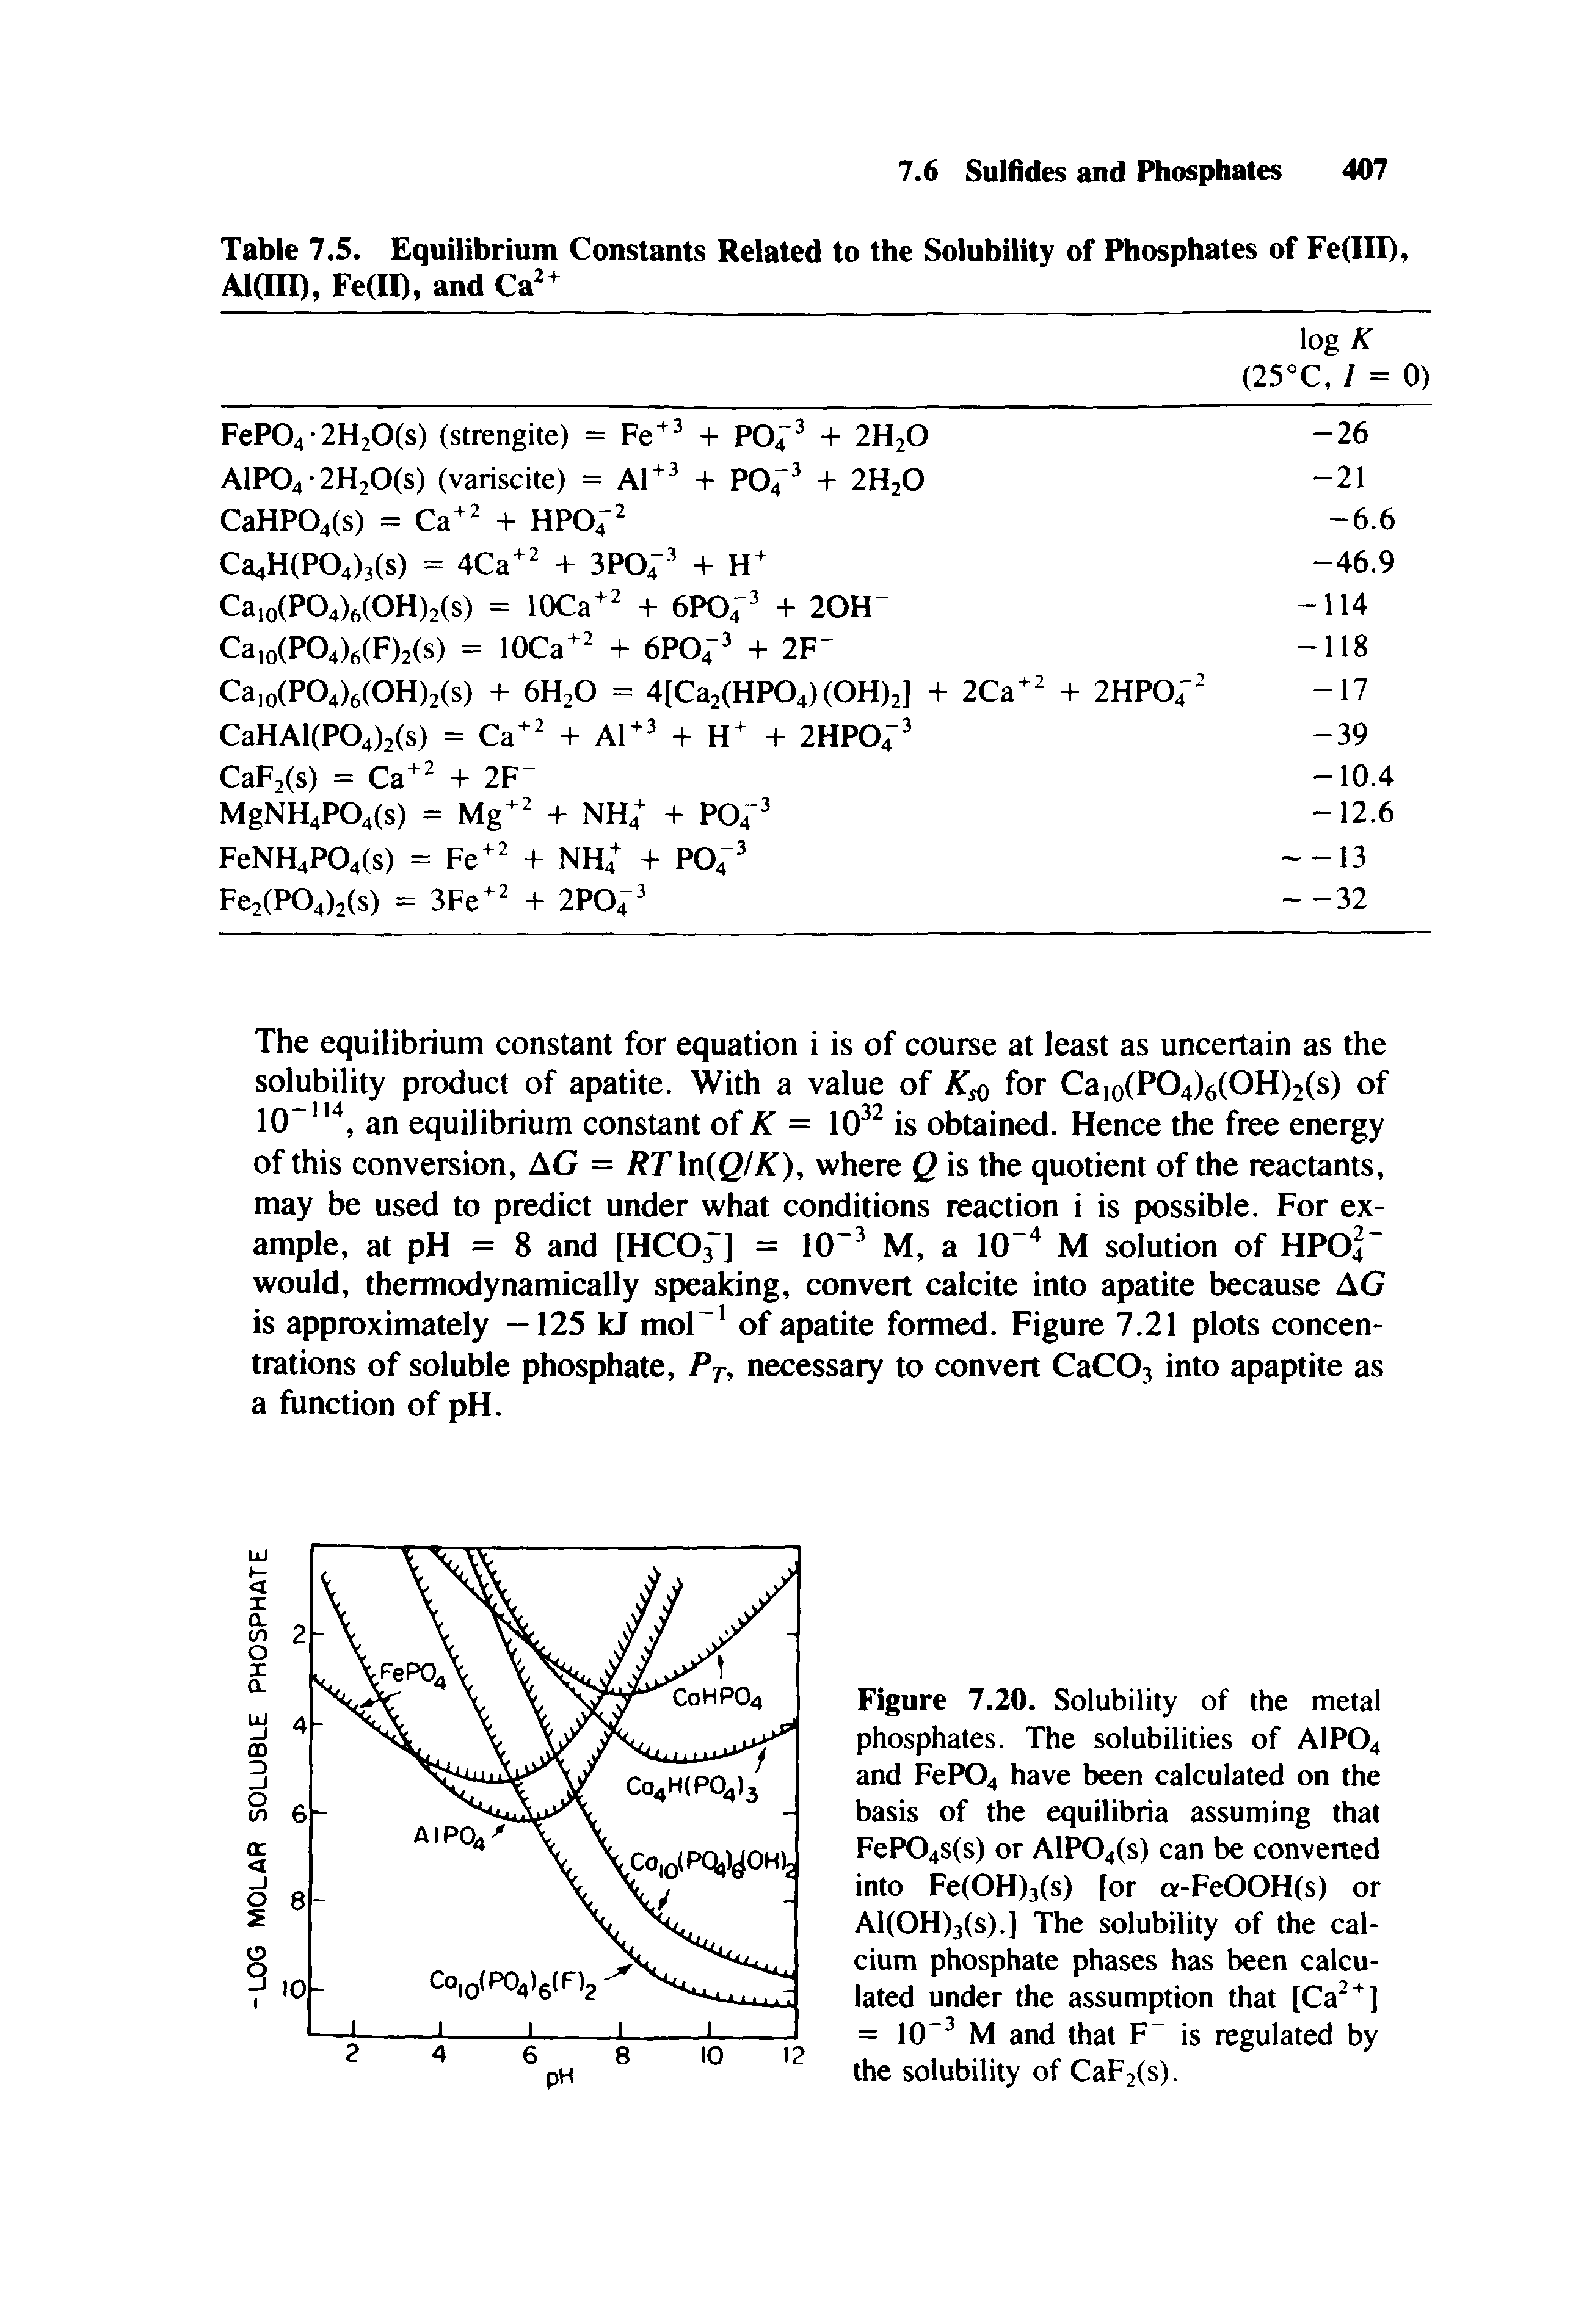 Figure 7.20. Solubility of the metal phosphates. The solubilities of AIPO4 and FeP04 have been calculated on the basis of the equilibria assuming that FeP04S(s) or AlP04(s) can be converted into Fe(OH)3(s) [or a-FeOOH(s) or A1(OH)3(s).] The solubility of the calcium phosphate phases has been calculated under the assumption that [Ca 1 = 10" M and that F is regulated by the solubility of CaF2(s).